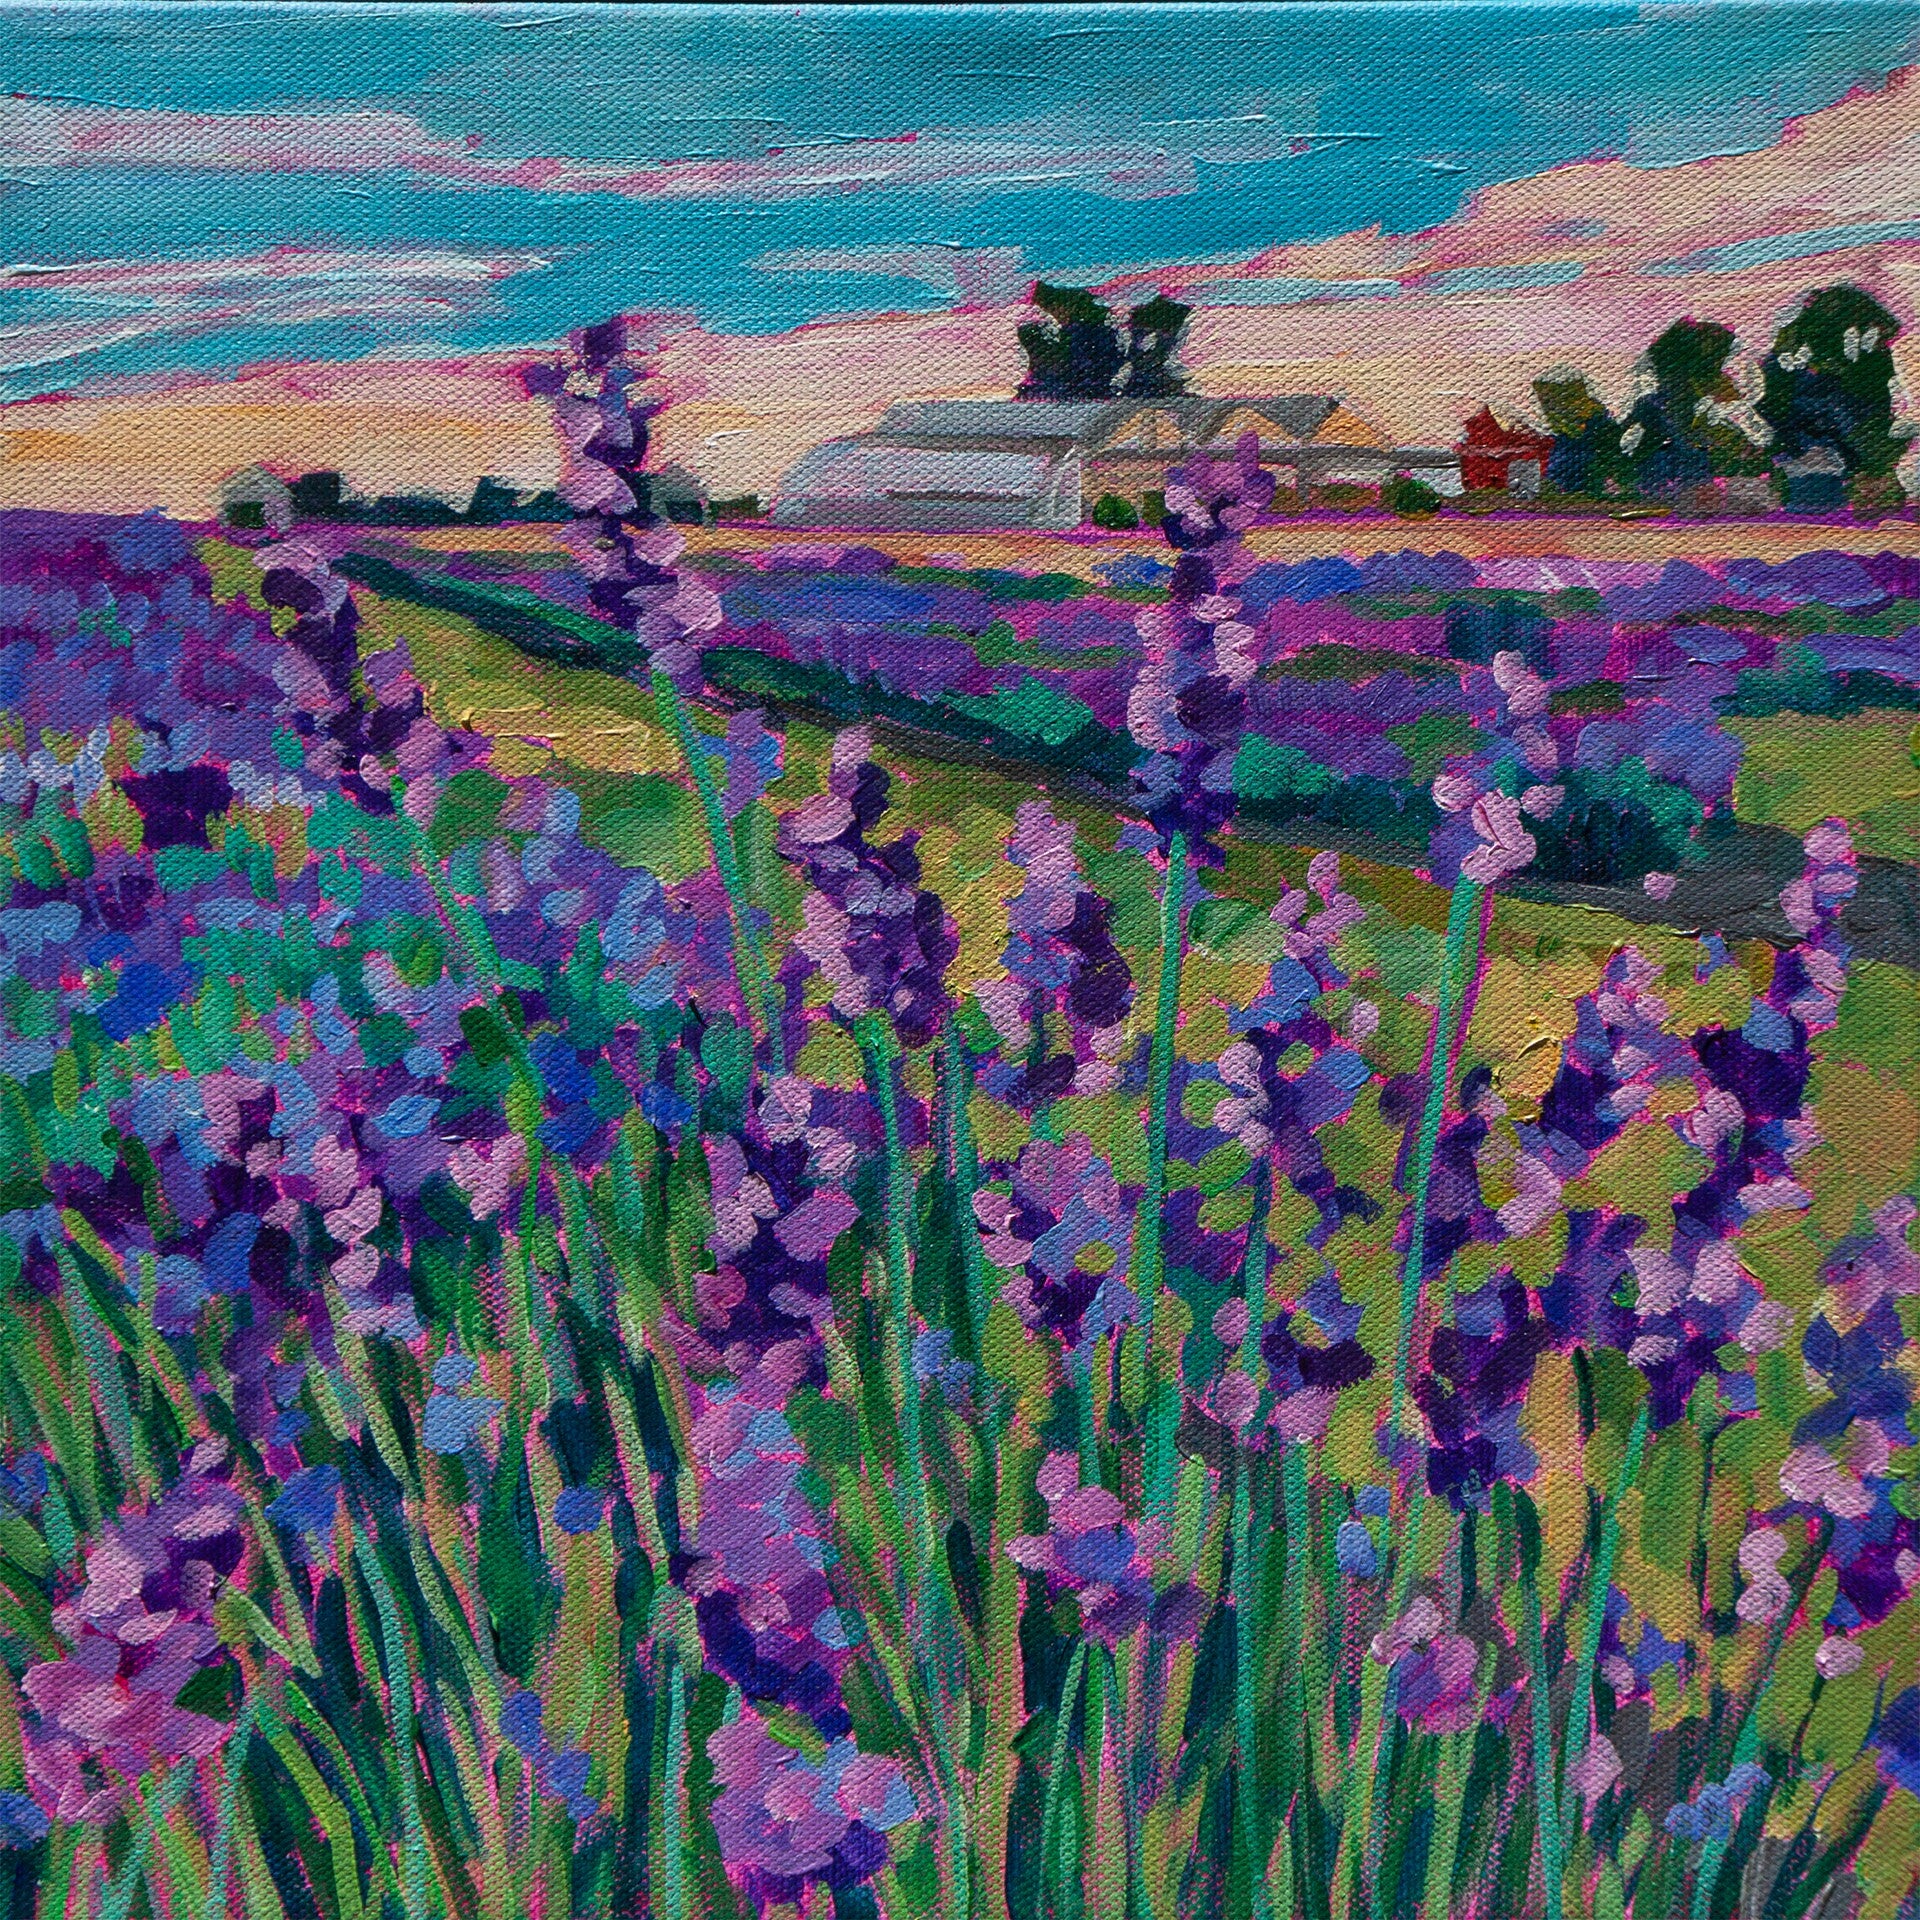 sunrise over lavender fields painting in Ontario Canada